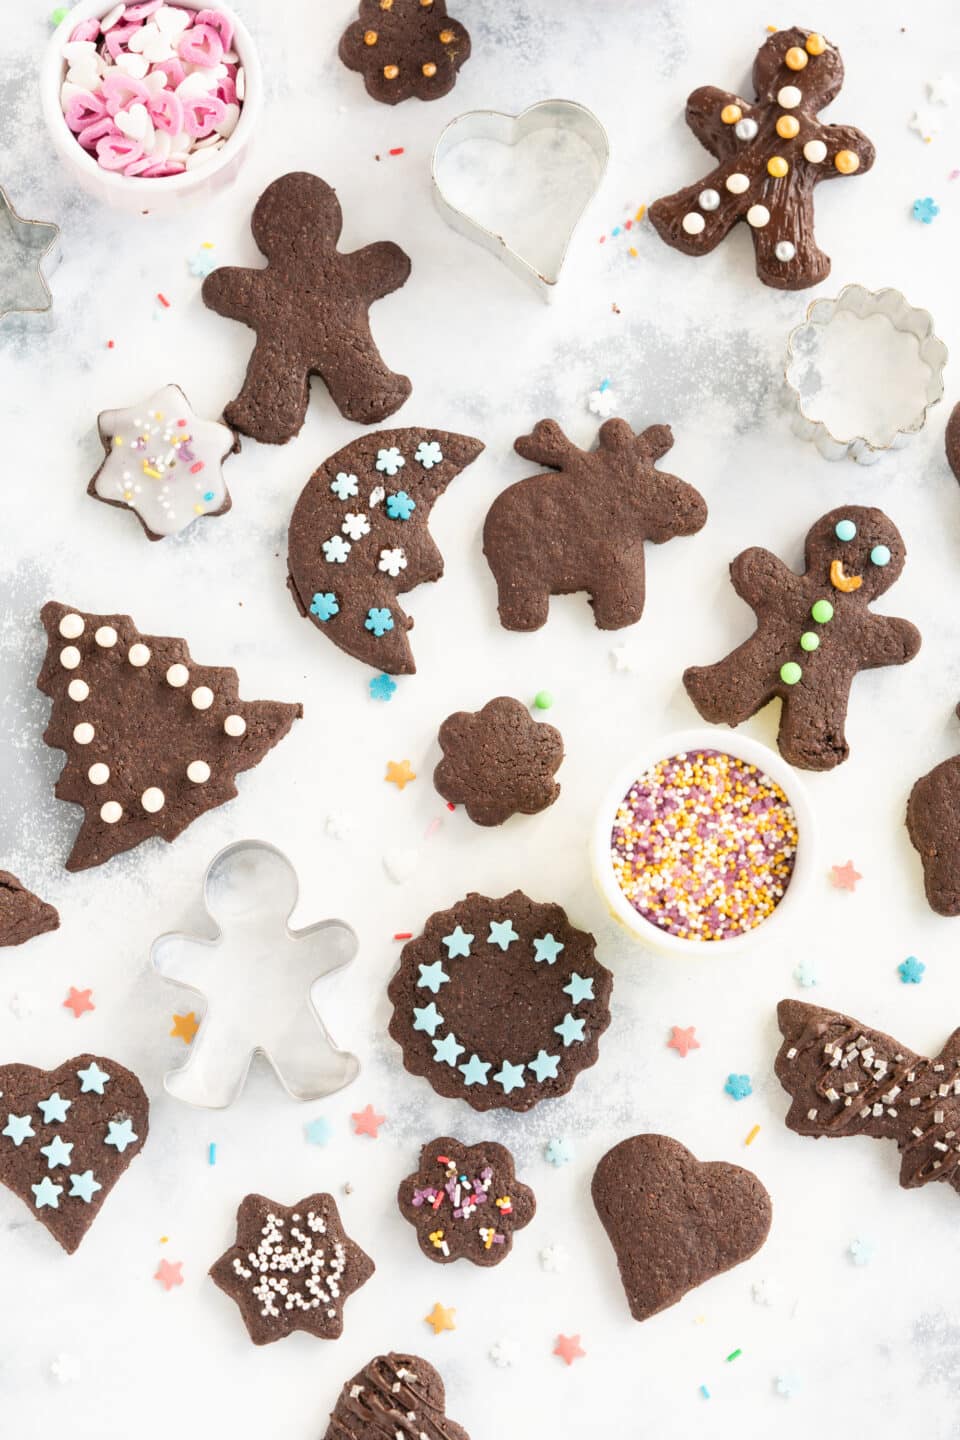 Chocolate Cut-Out Cookies